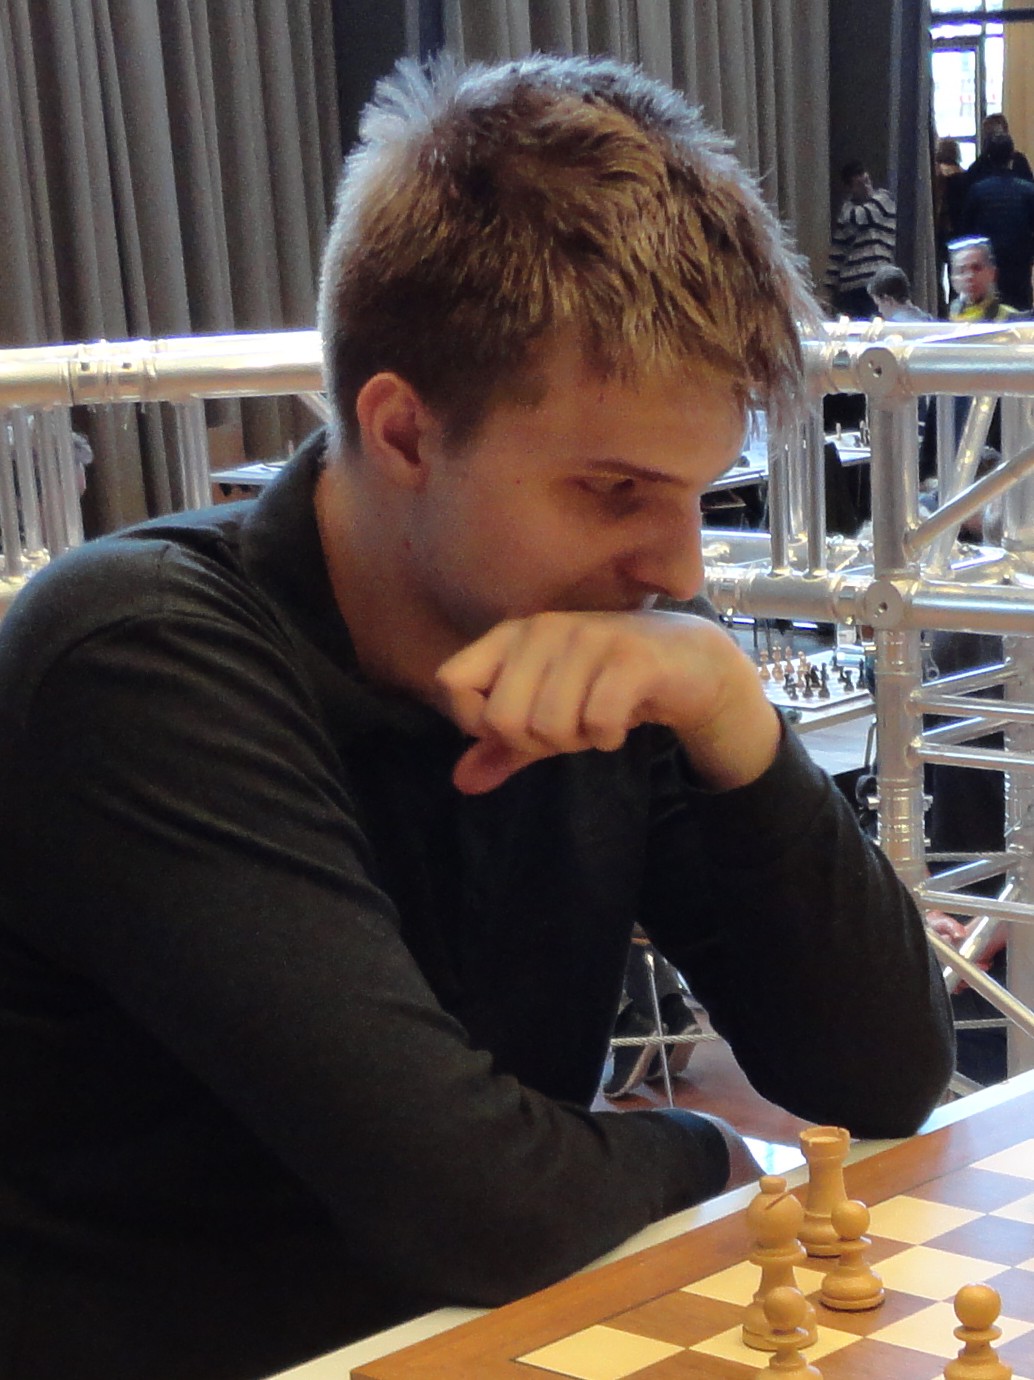 Richard Rapport: It's fun to play with good players every evening! 